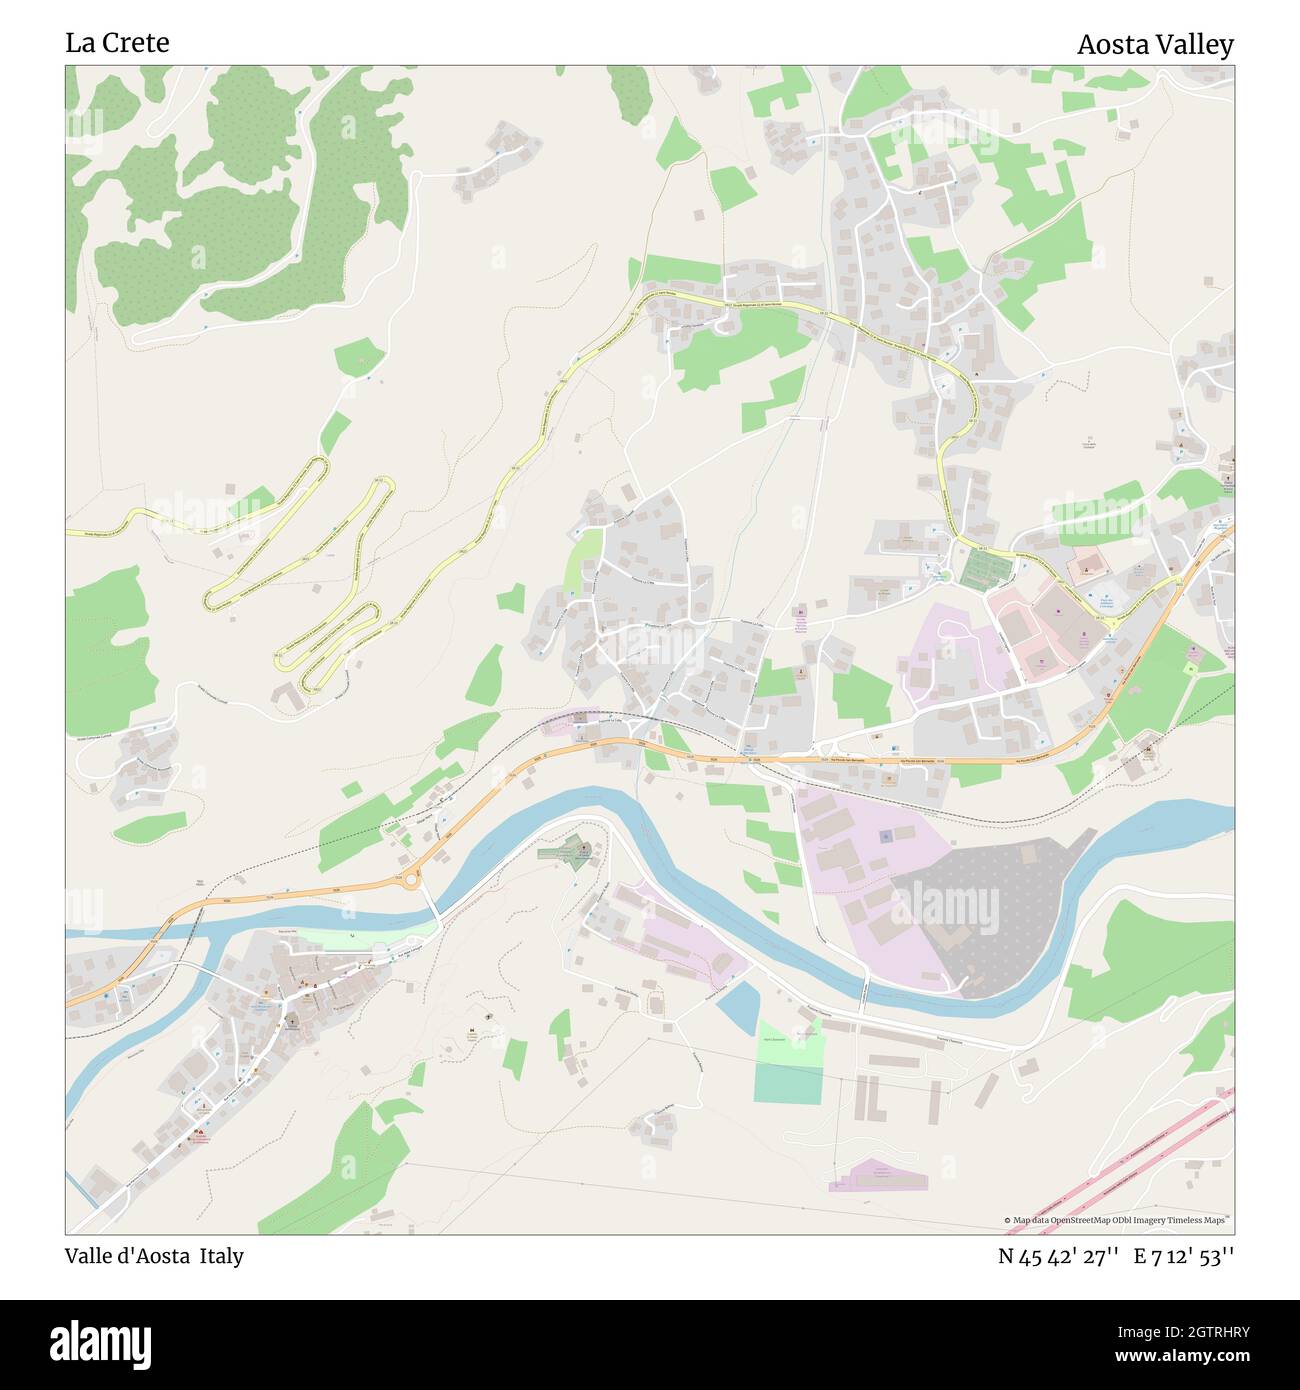 La Crete, Valle d'Aosta, Italy, Aosta Valley, N 45 42' 27'', E 7 12' 53'', map, Timeless Map published in 2021. Travelers, explorers and adventurers like Florence Nightingale, David Livingstone, Ernest Shackleton, Lewis and Clark and Sherlock Holmes relied on maps to plan travels to the world's most remote corners, Timeless Maps is mapping most locations on the globe, showing the achievement of great dreams Stock Photo